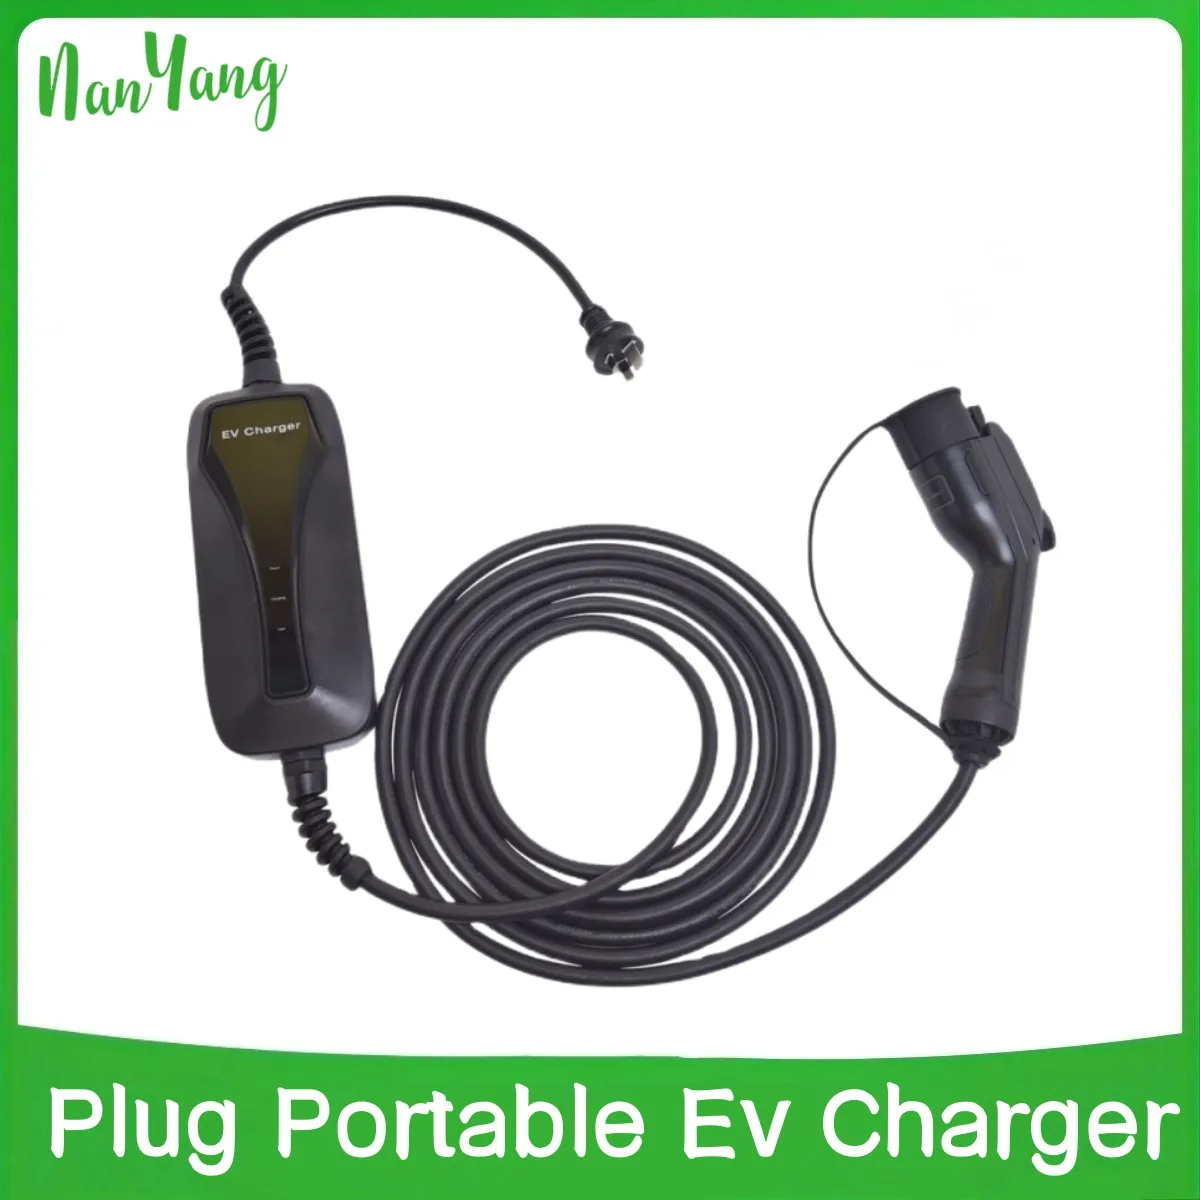 

Level 2 Ev Charger 6A 8A 10A IEC 62196 EV Charger Type 1 Type2 EVSE Portable Charging with AU NZ Plug Portable Ev Charger